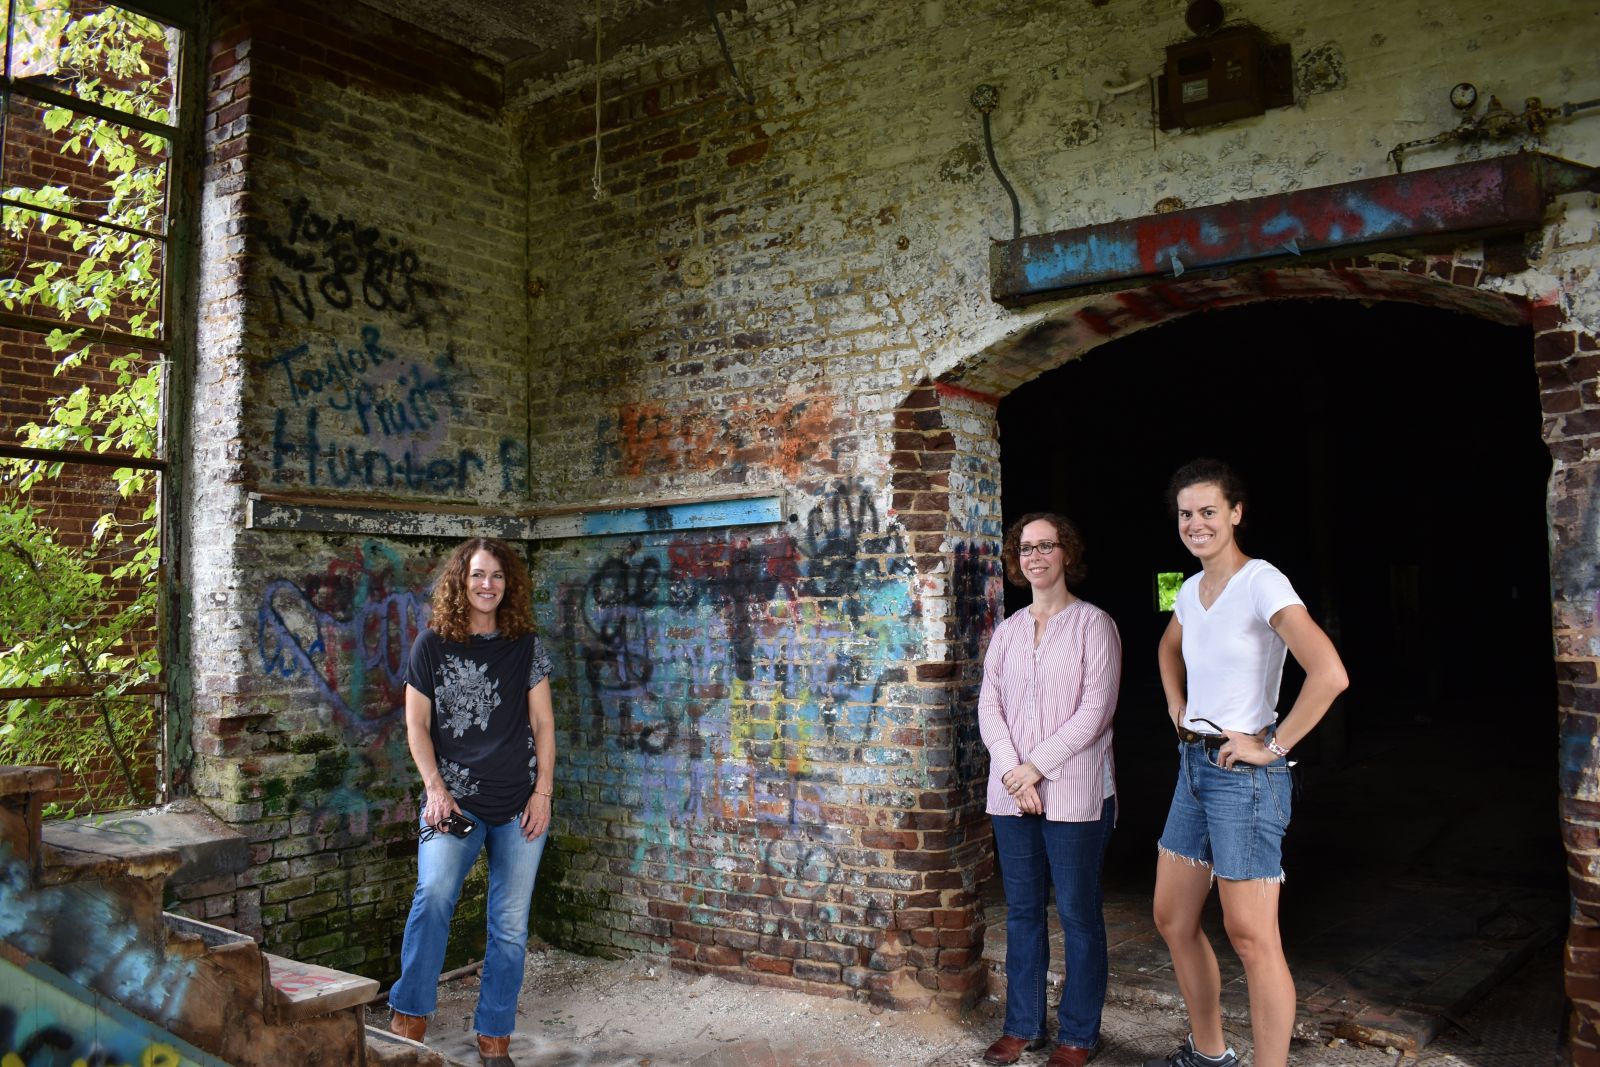 M. Pters Group partner Jennifer Gosnell, Melanie Peters and Maggie Law, asset manager for the company, survey the mill's tower, which will undergo extensive rehabilitation. (Photo/Molly Hulsey)